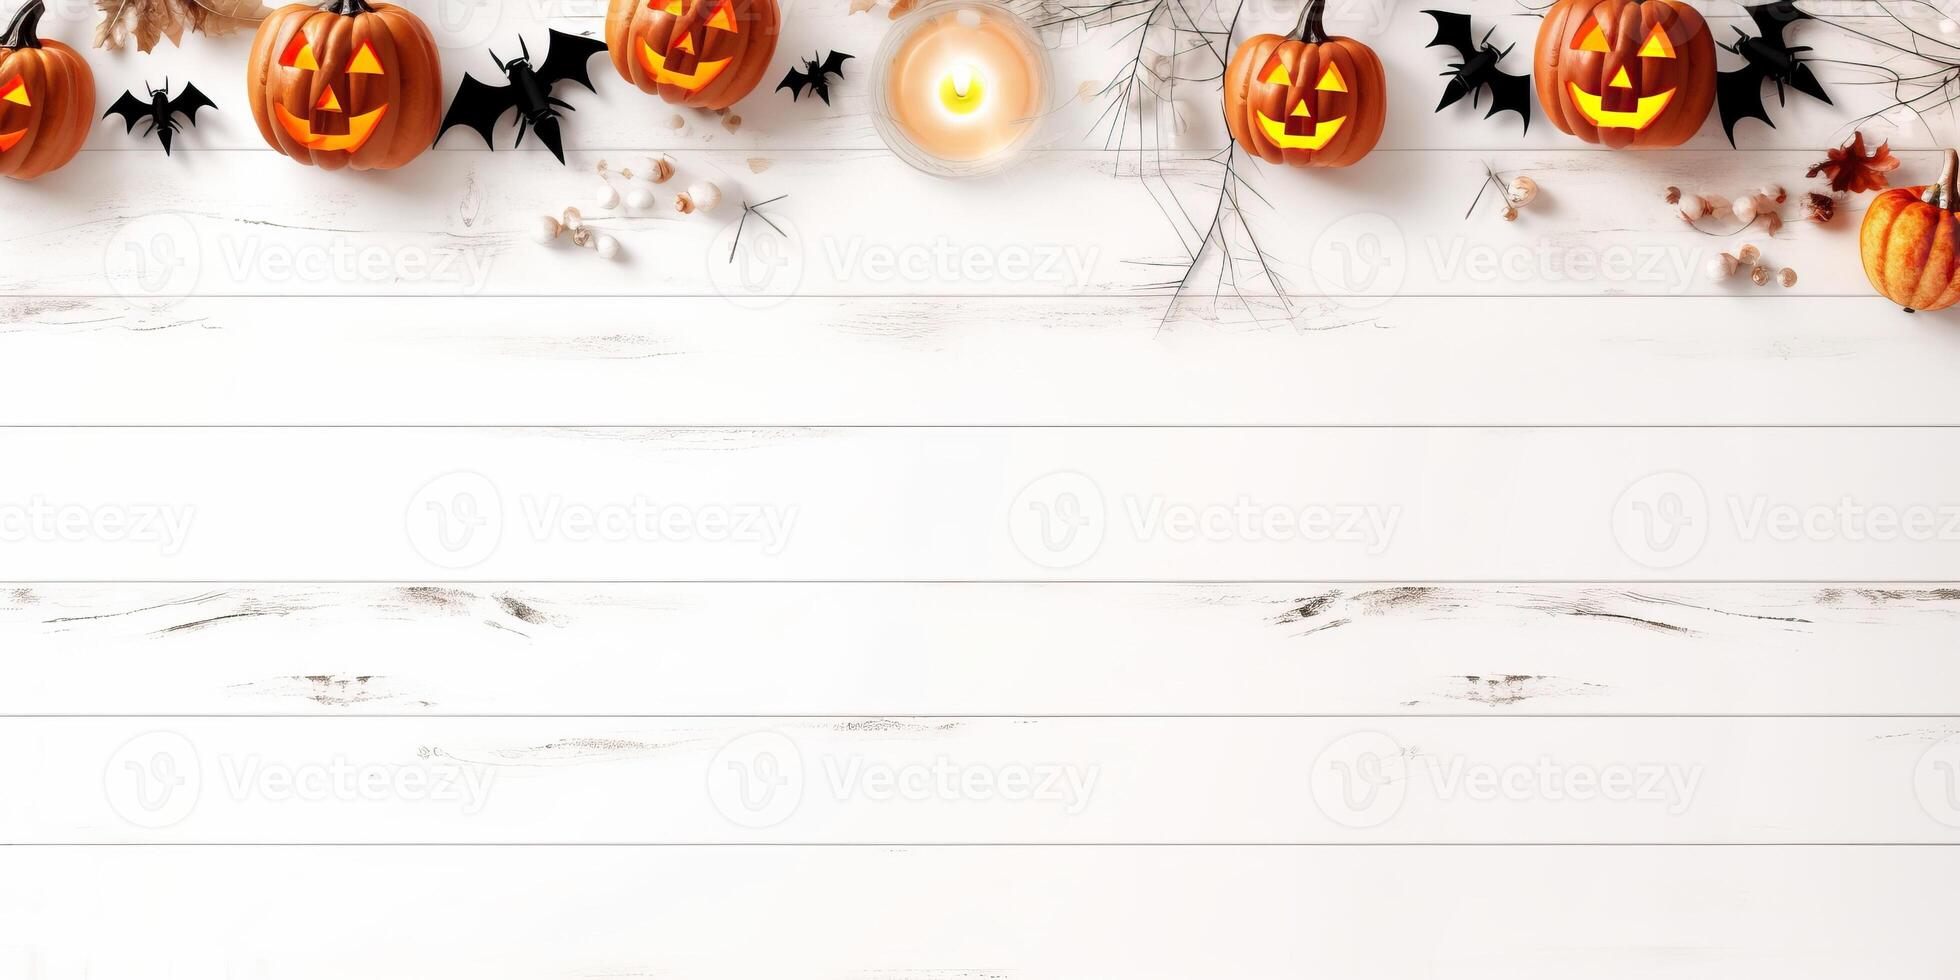 Illustration ballon and pumpkin on the wooden board background made with photo